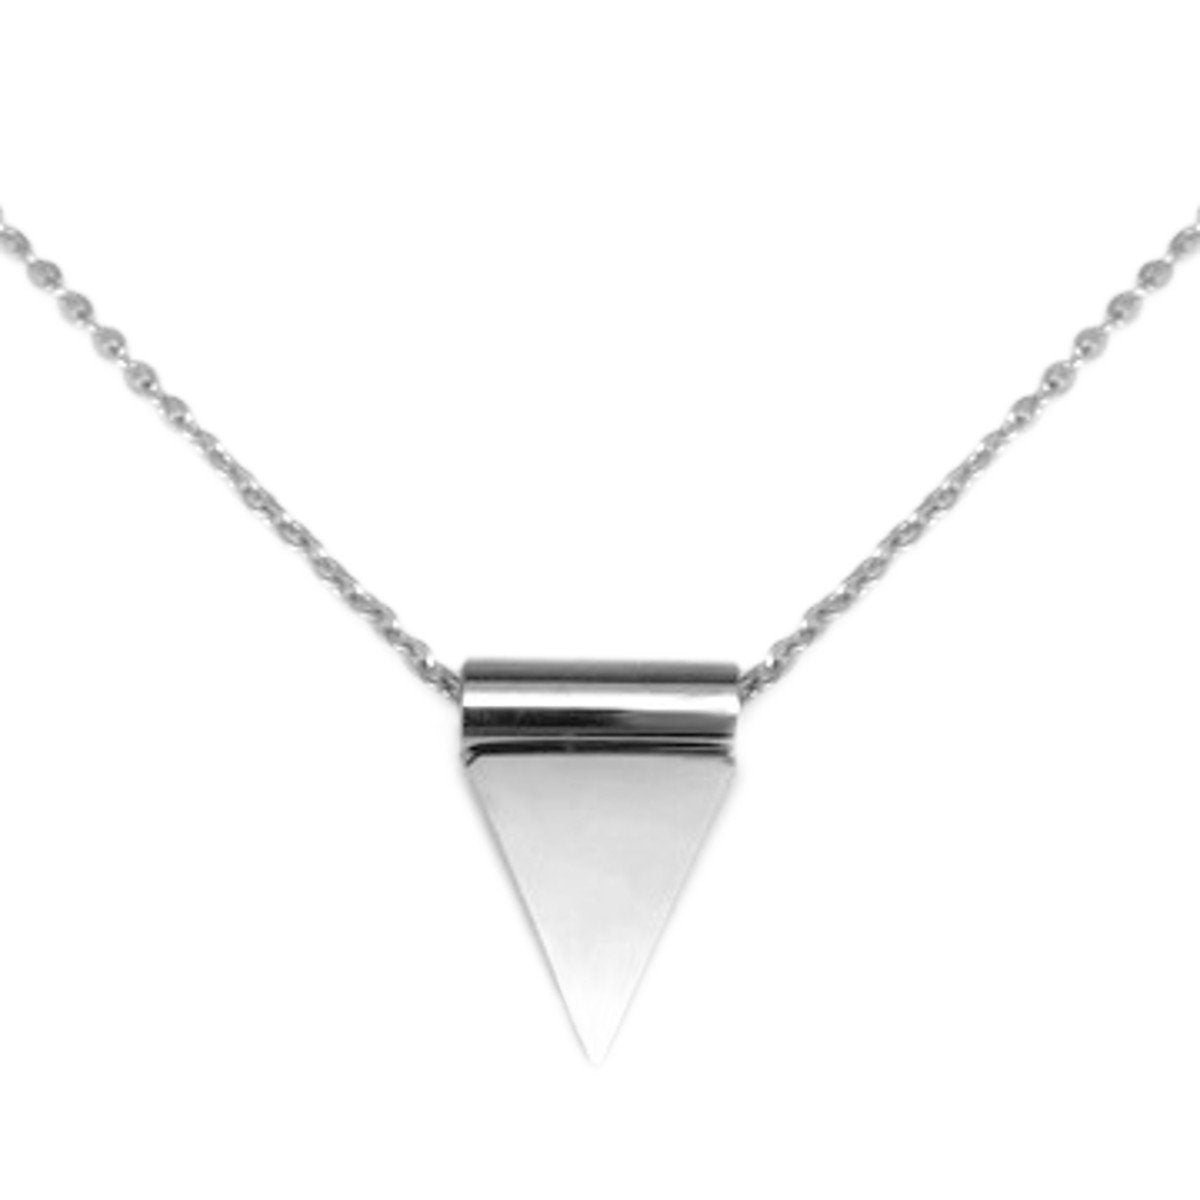 Small Stainless Steel Simple Triangle Necklace, Feminine Symbol, Spike Necklace, Minimalist Style, Gift for Fashionista